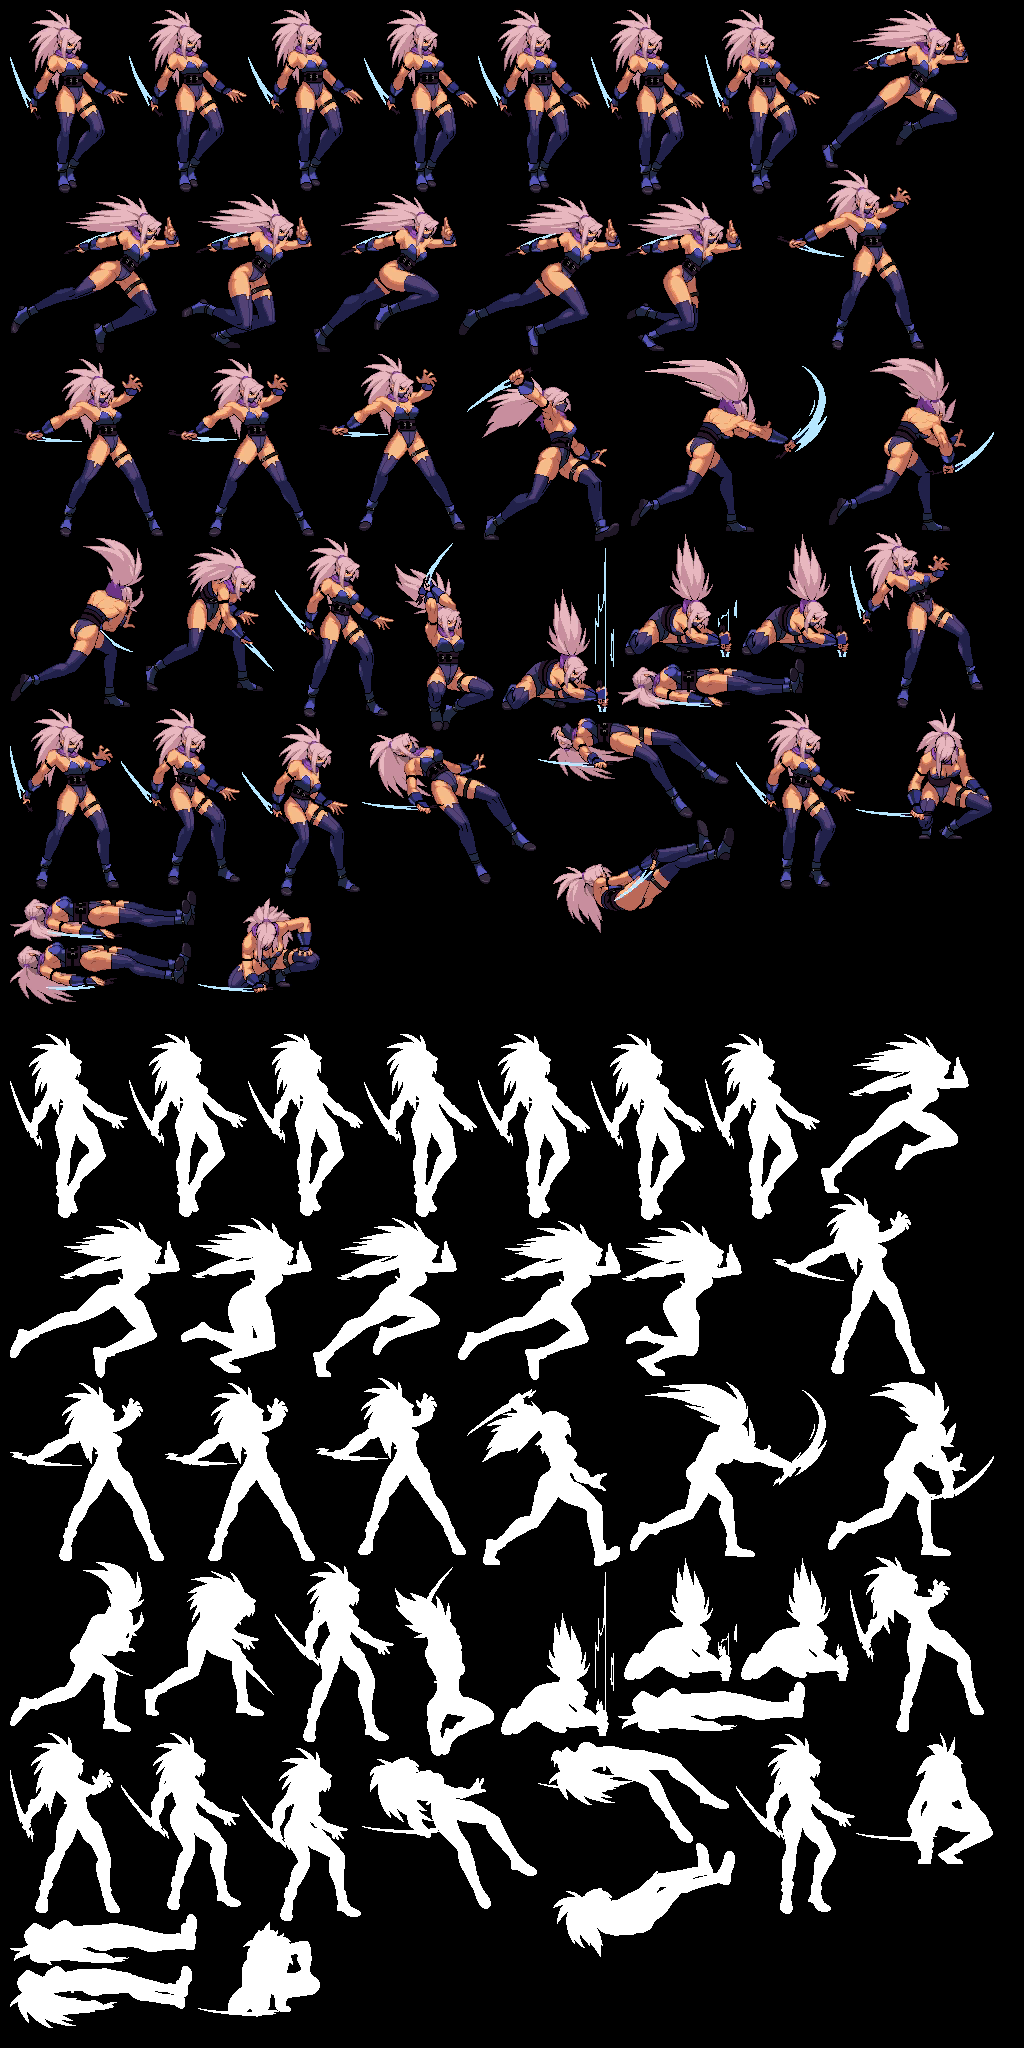 The King of Fighters: Destiny - Wikipedia